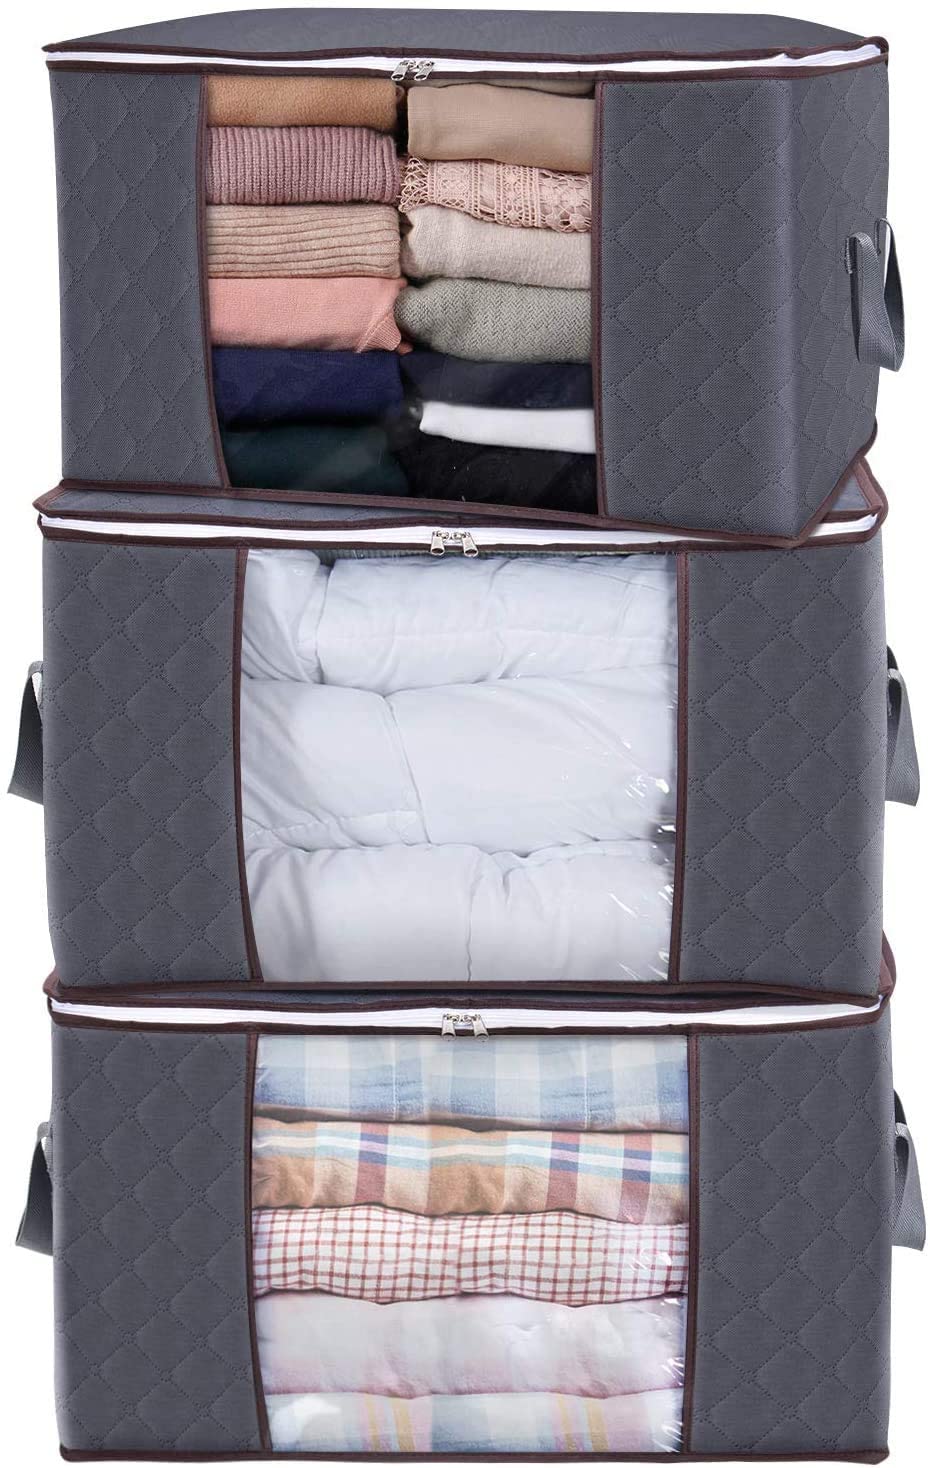 Lifewit Large Capacity Clothes Storage Bag. Home Organization Hacks, Ideas, and Tips from Lifewit - 1